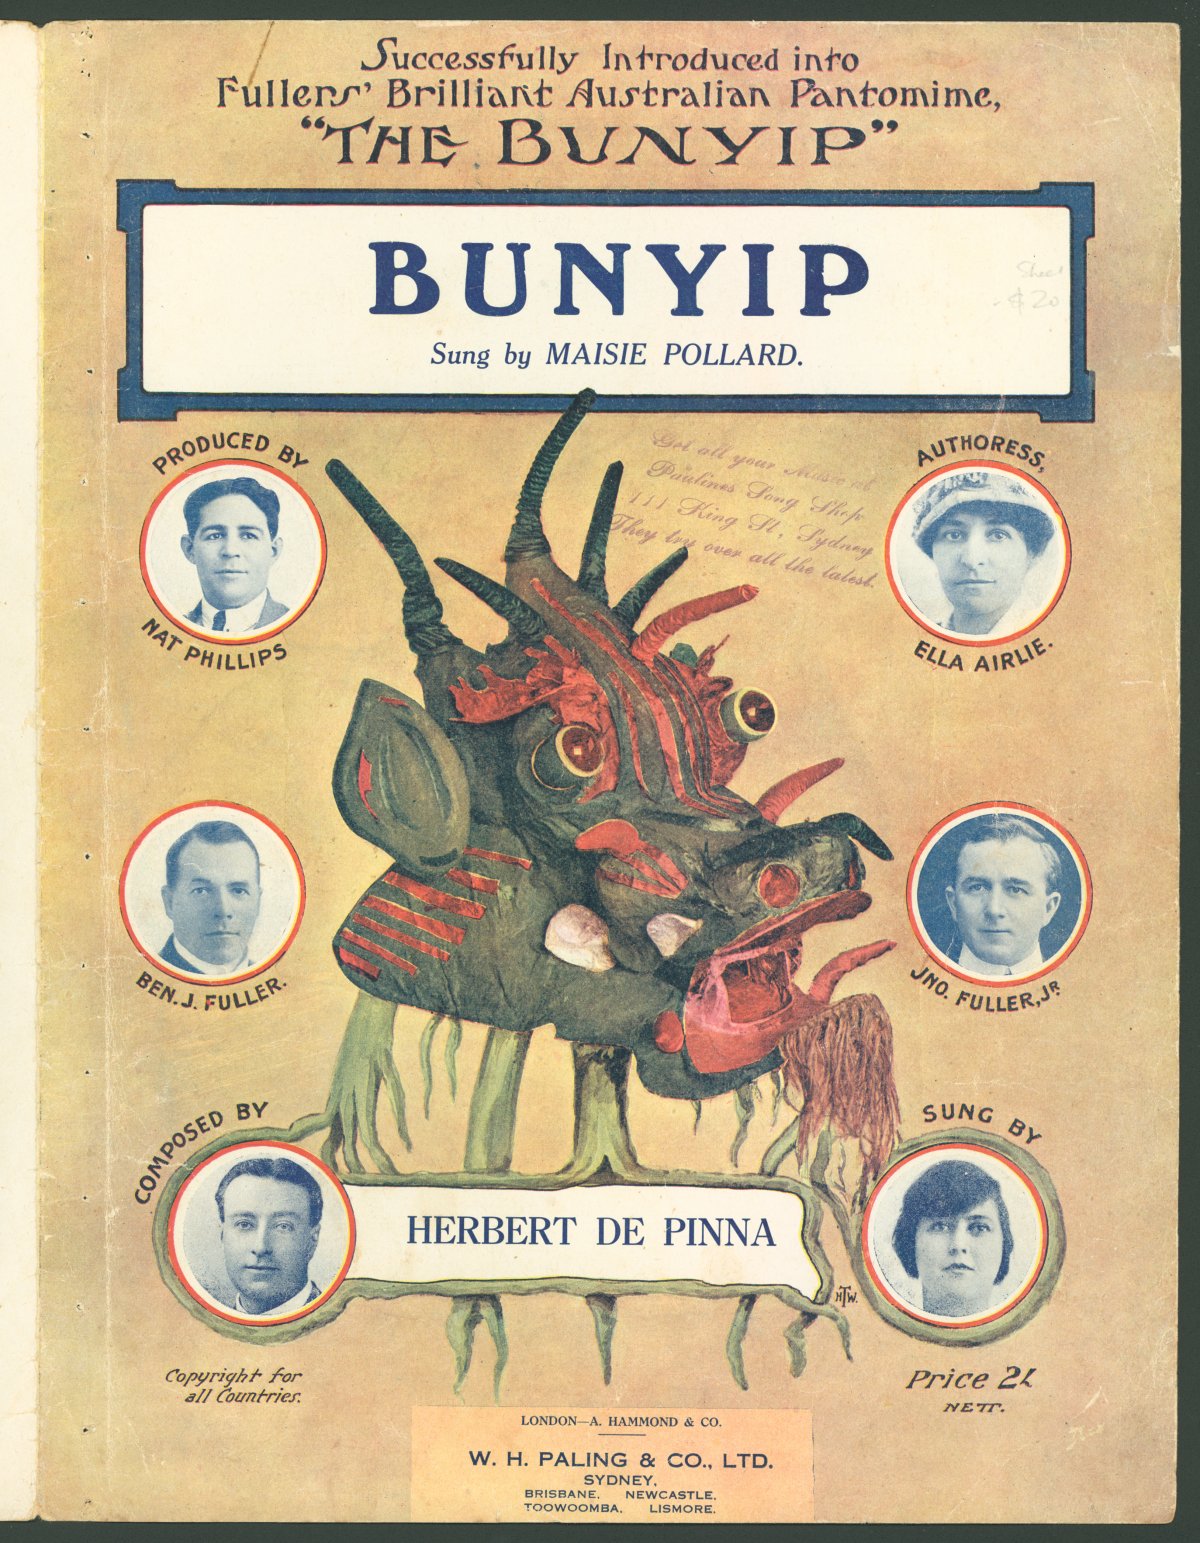 A book cover of the performance Bunyip. An image of an imagined bunyip takes up the centre of the cover. It looks vaguely like a Chinese dragon crossed with a pig and a cow. It is green and red. Surrounding the Bunyip head are inset portraits of the author, composer and other persons connected with the performance.